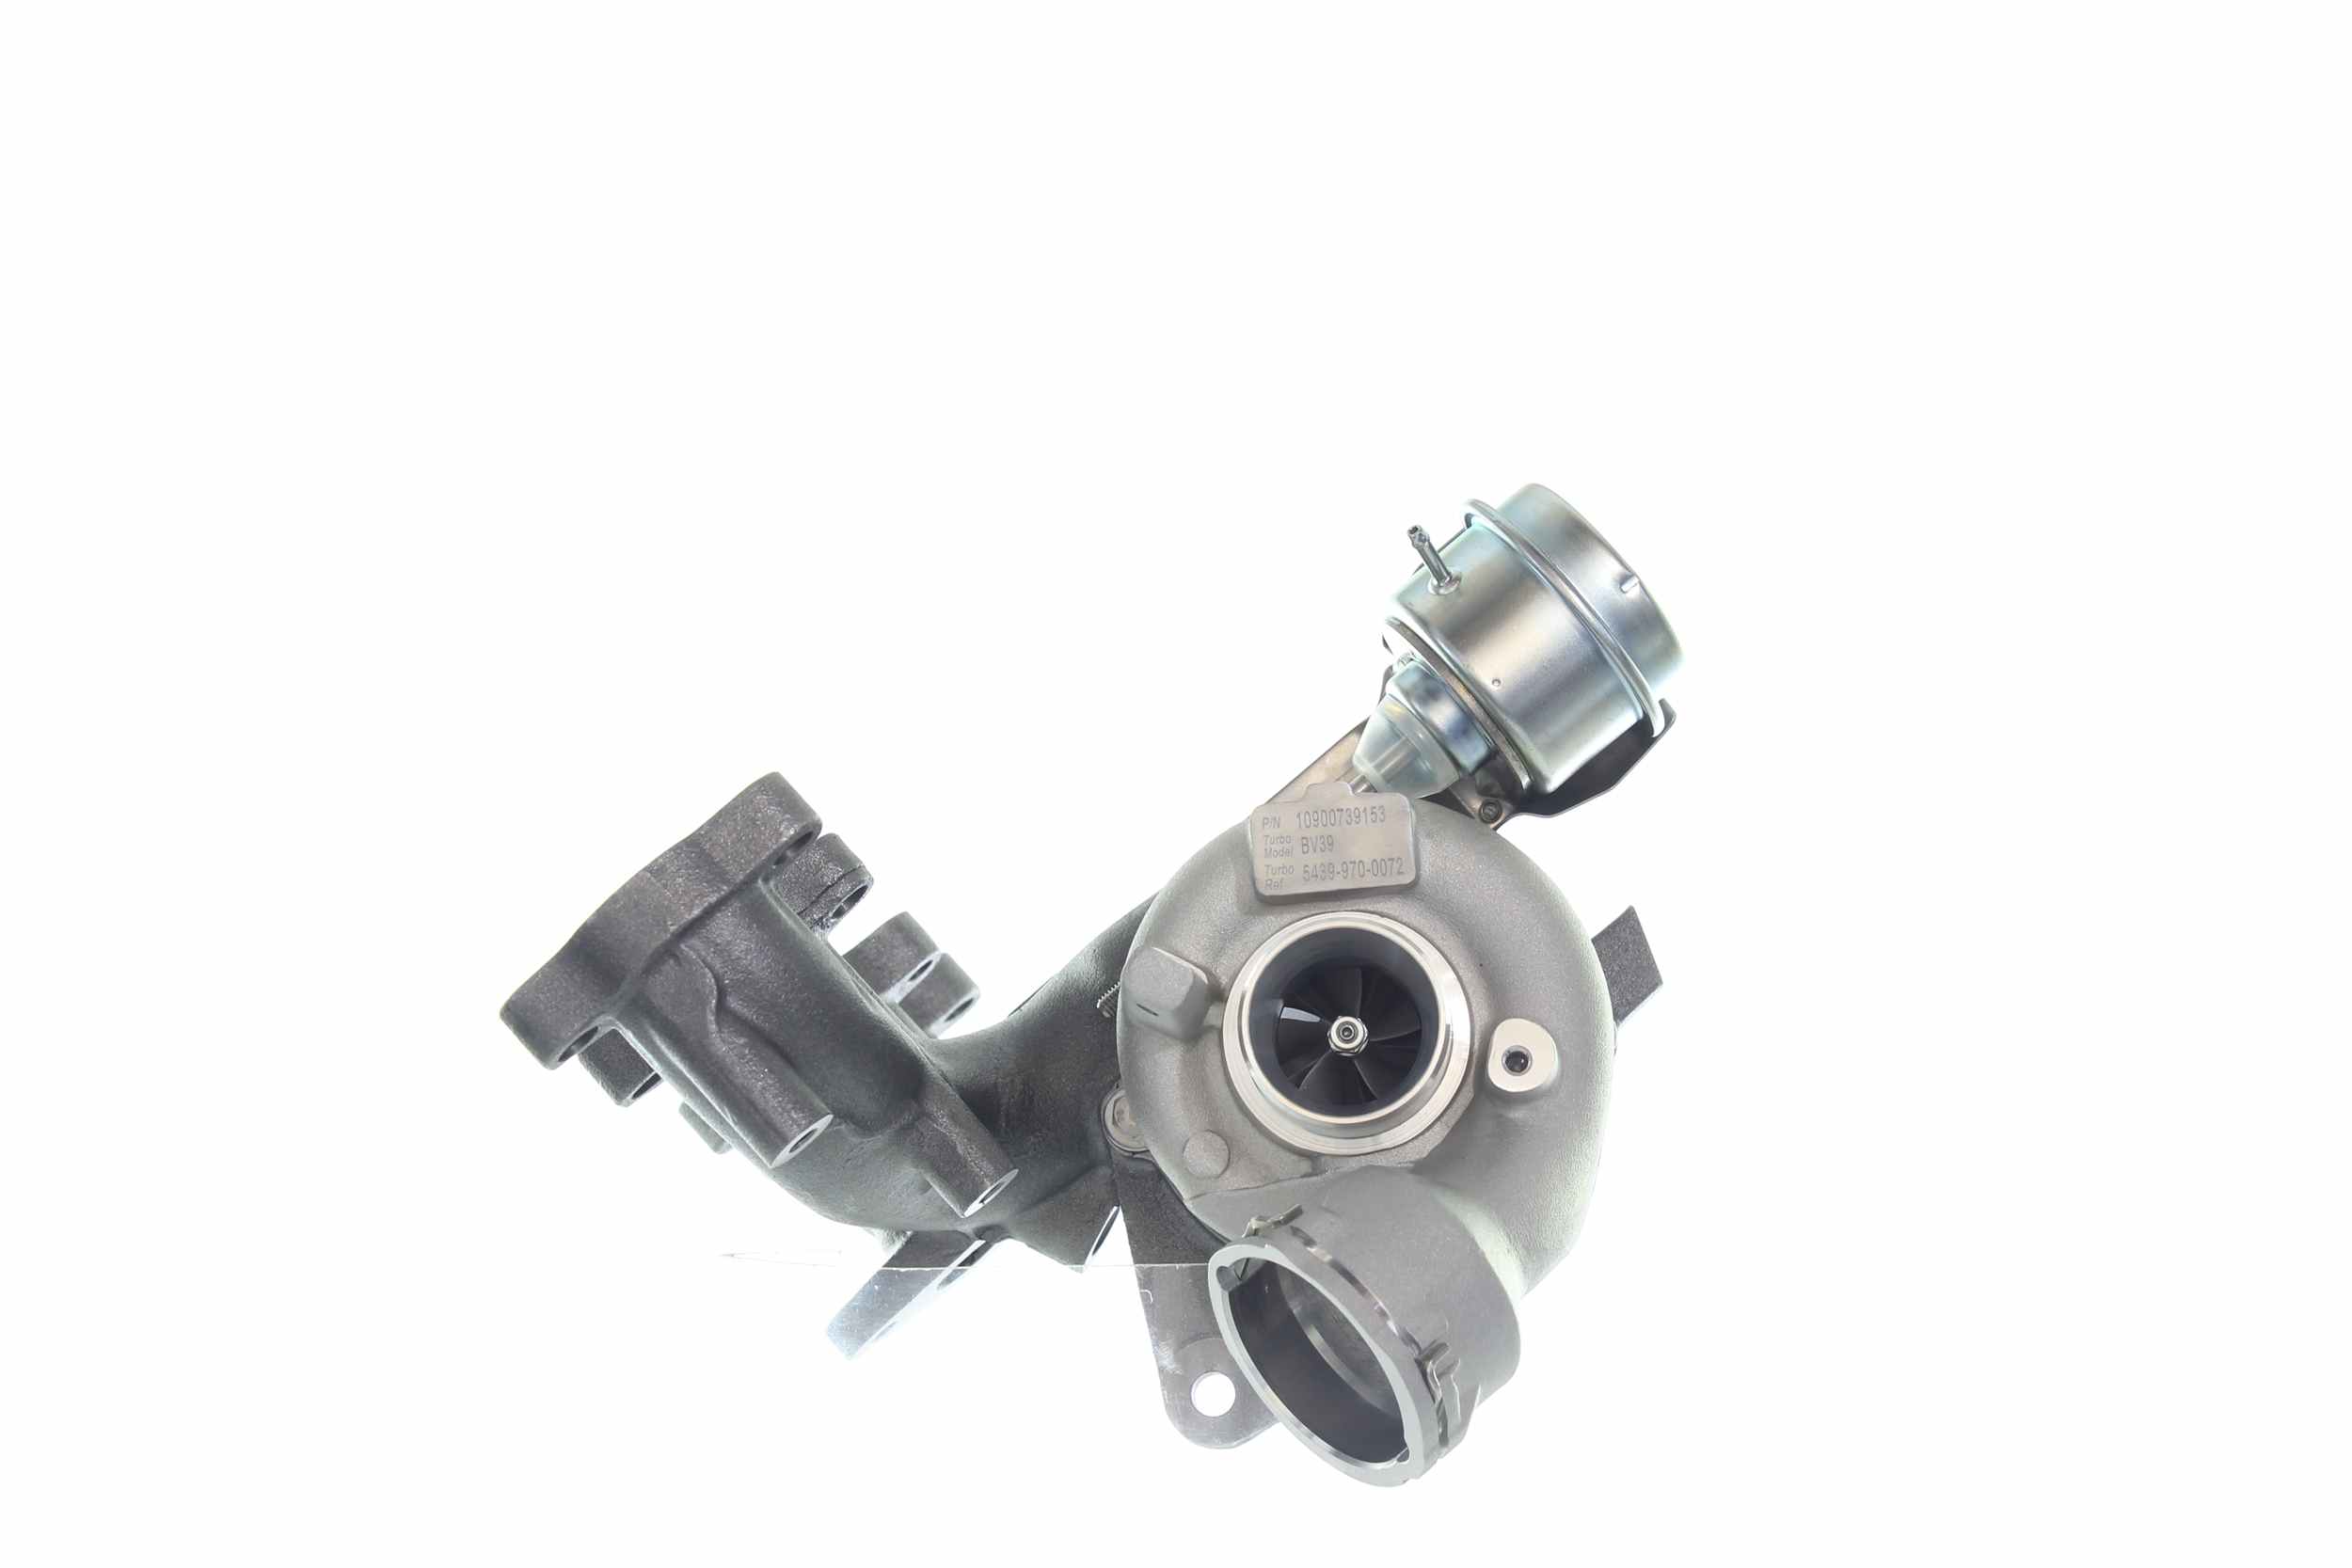 ALANKO 10900739 Turbocharger Exhaust Turbocharger, Incl. Gasket Set, with attachment material